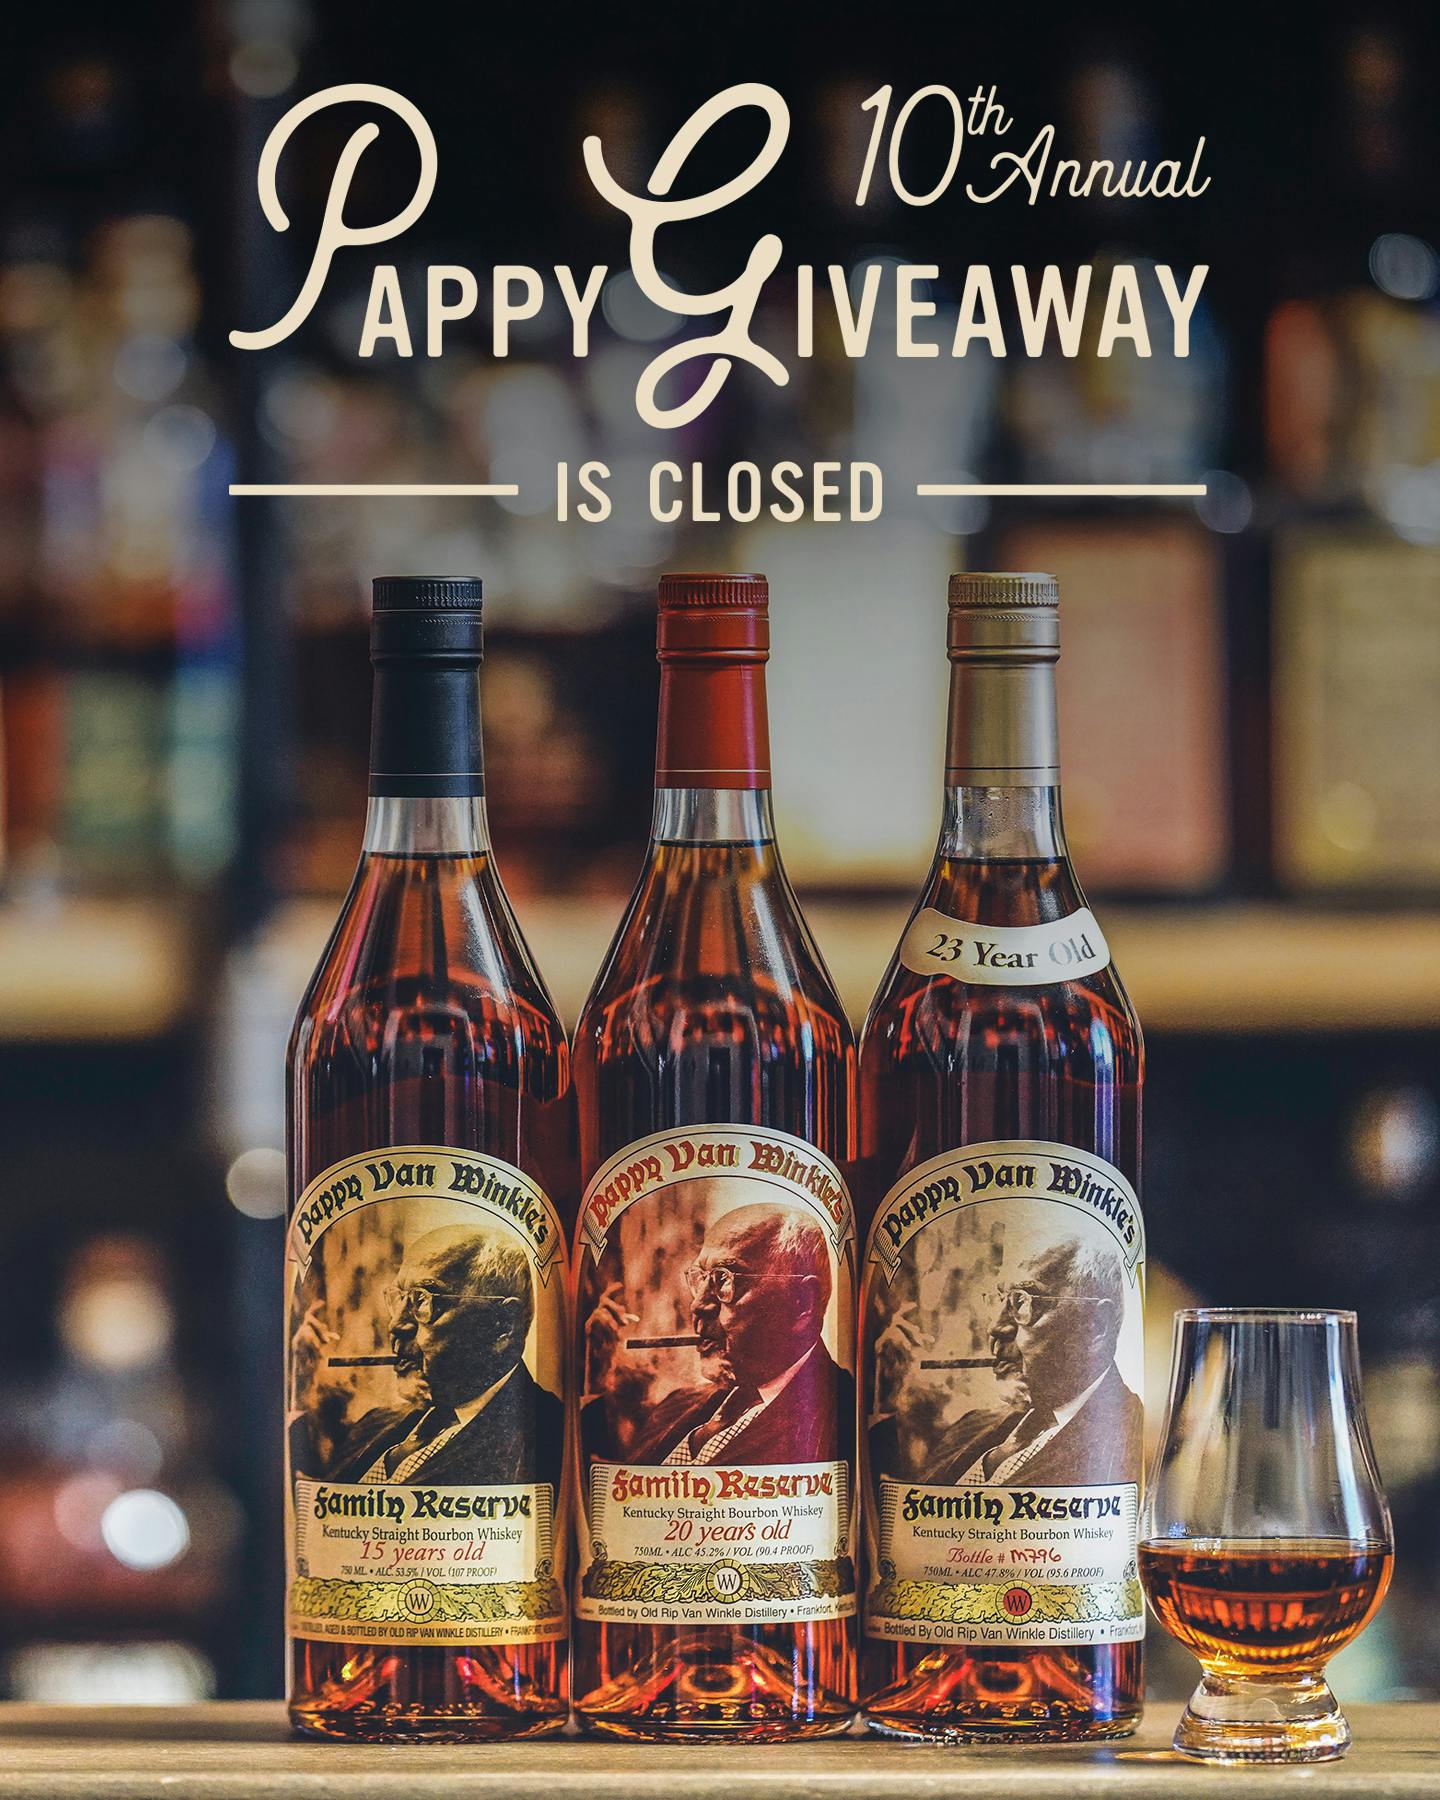 Pappy Van Winkle and glass